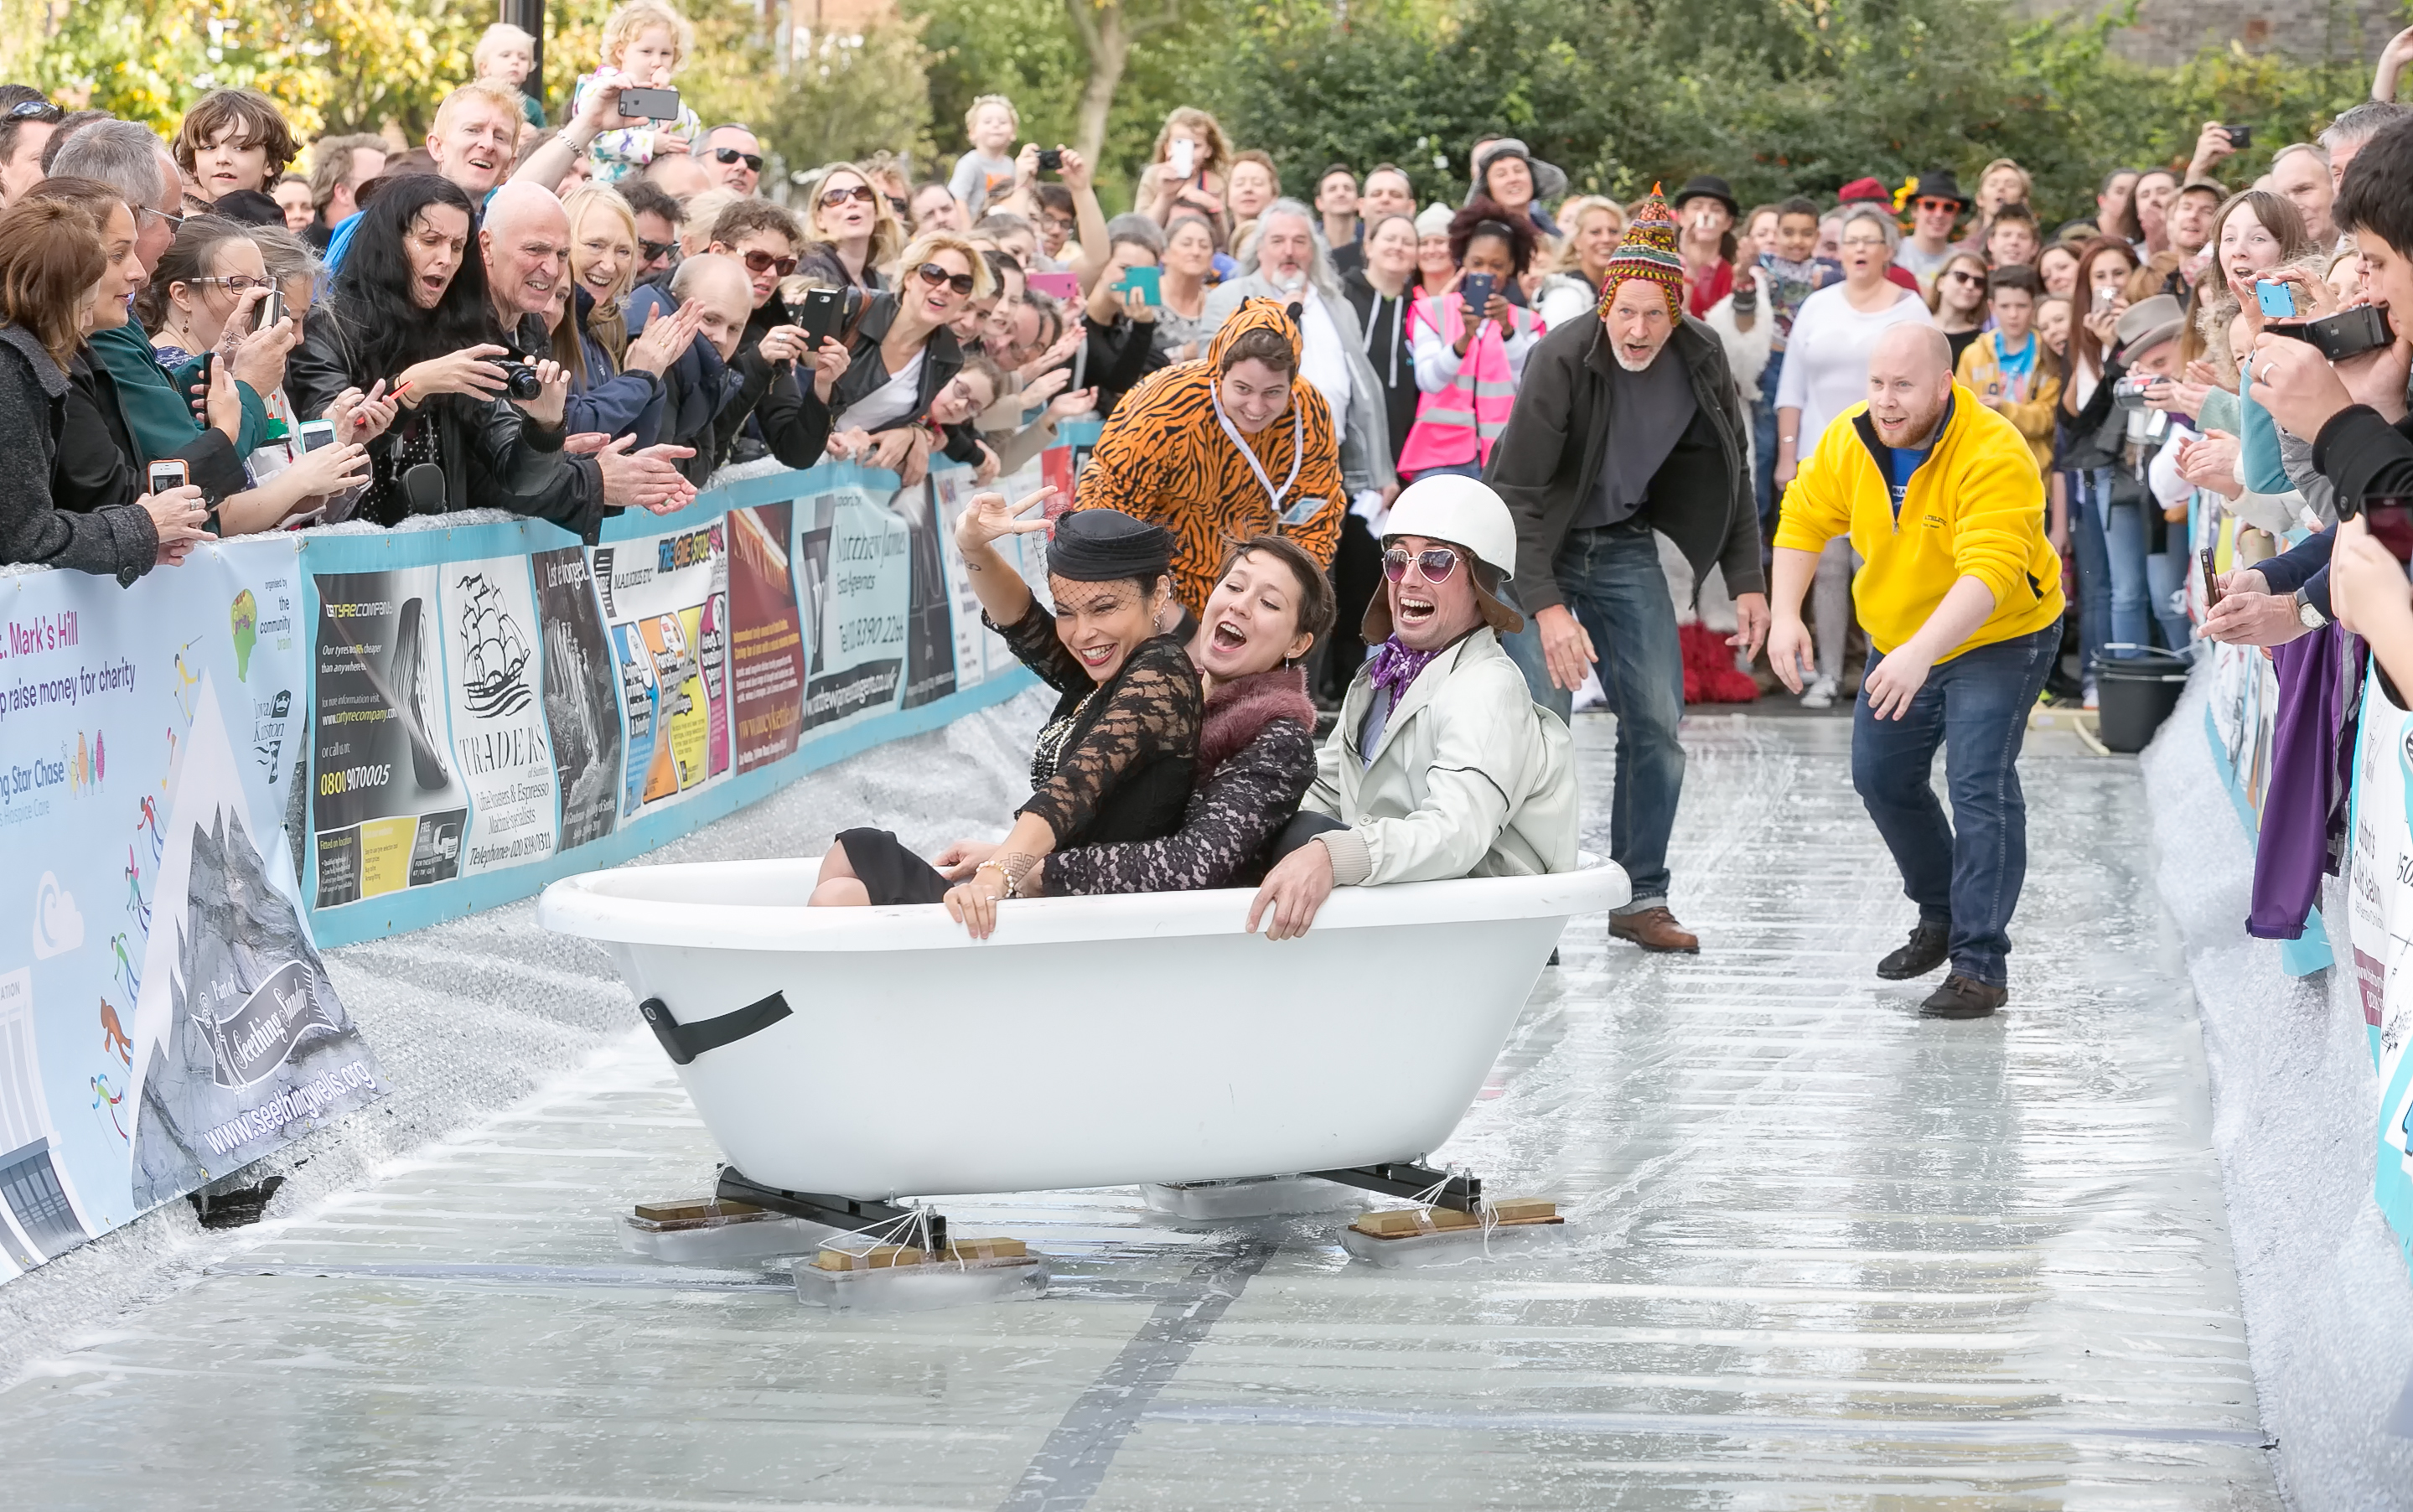 Two women and a man are in a bathtub in fancy dress smiling and laughing. They slide along a slippery surface as an onlooking crowd takes photos. Behind them, three men who have pushed the bathtub look on.